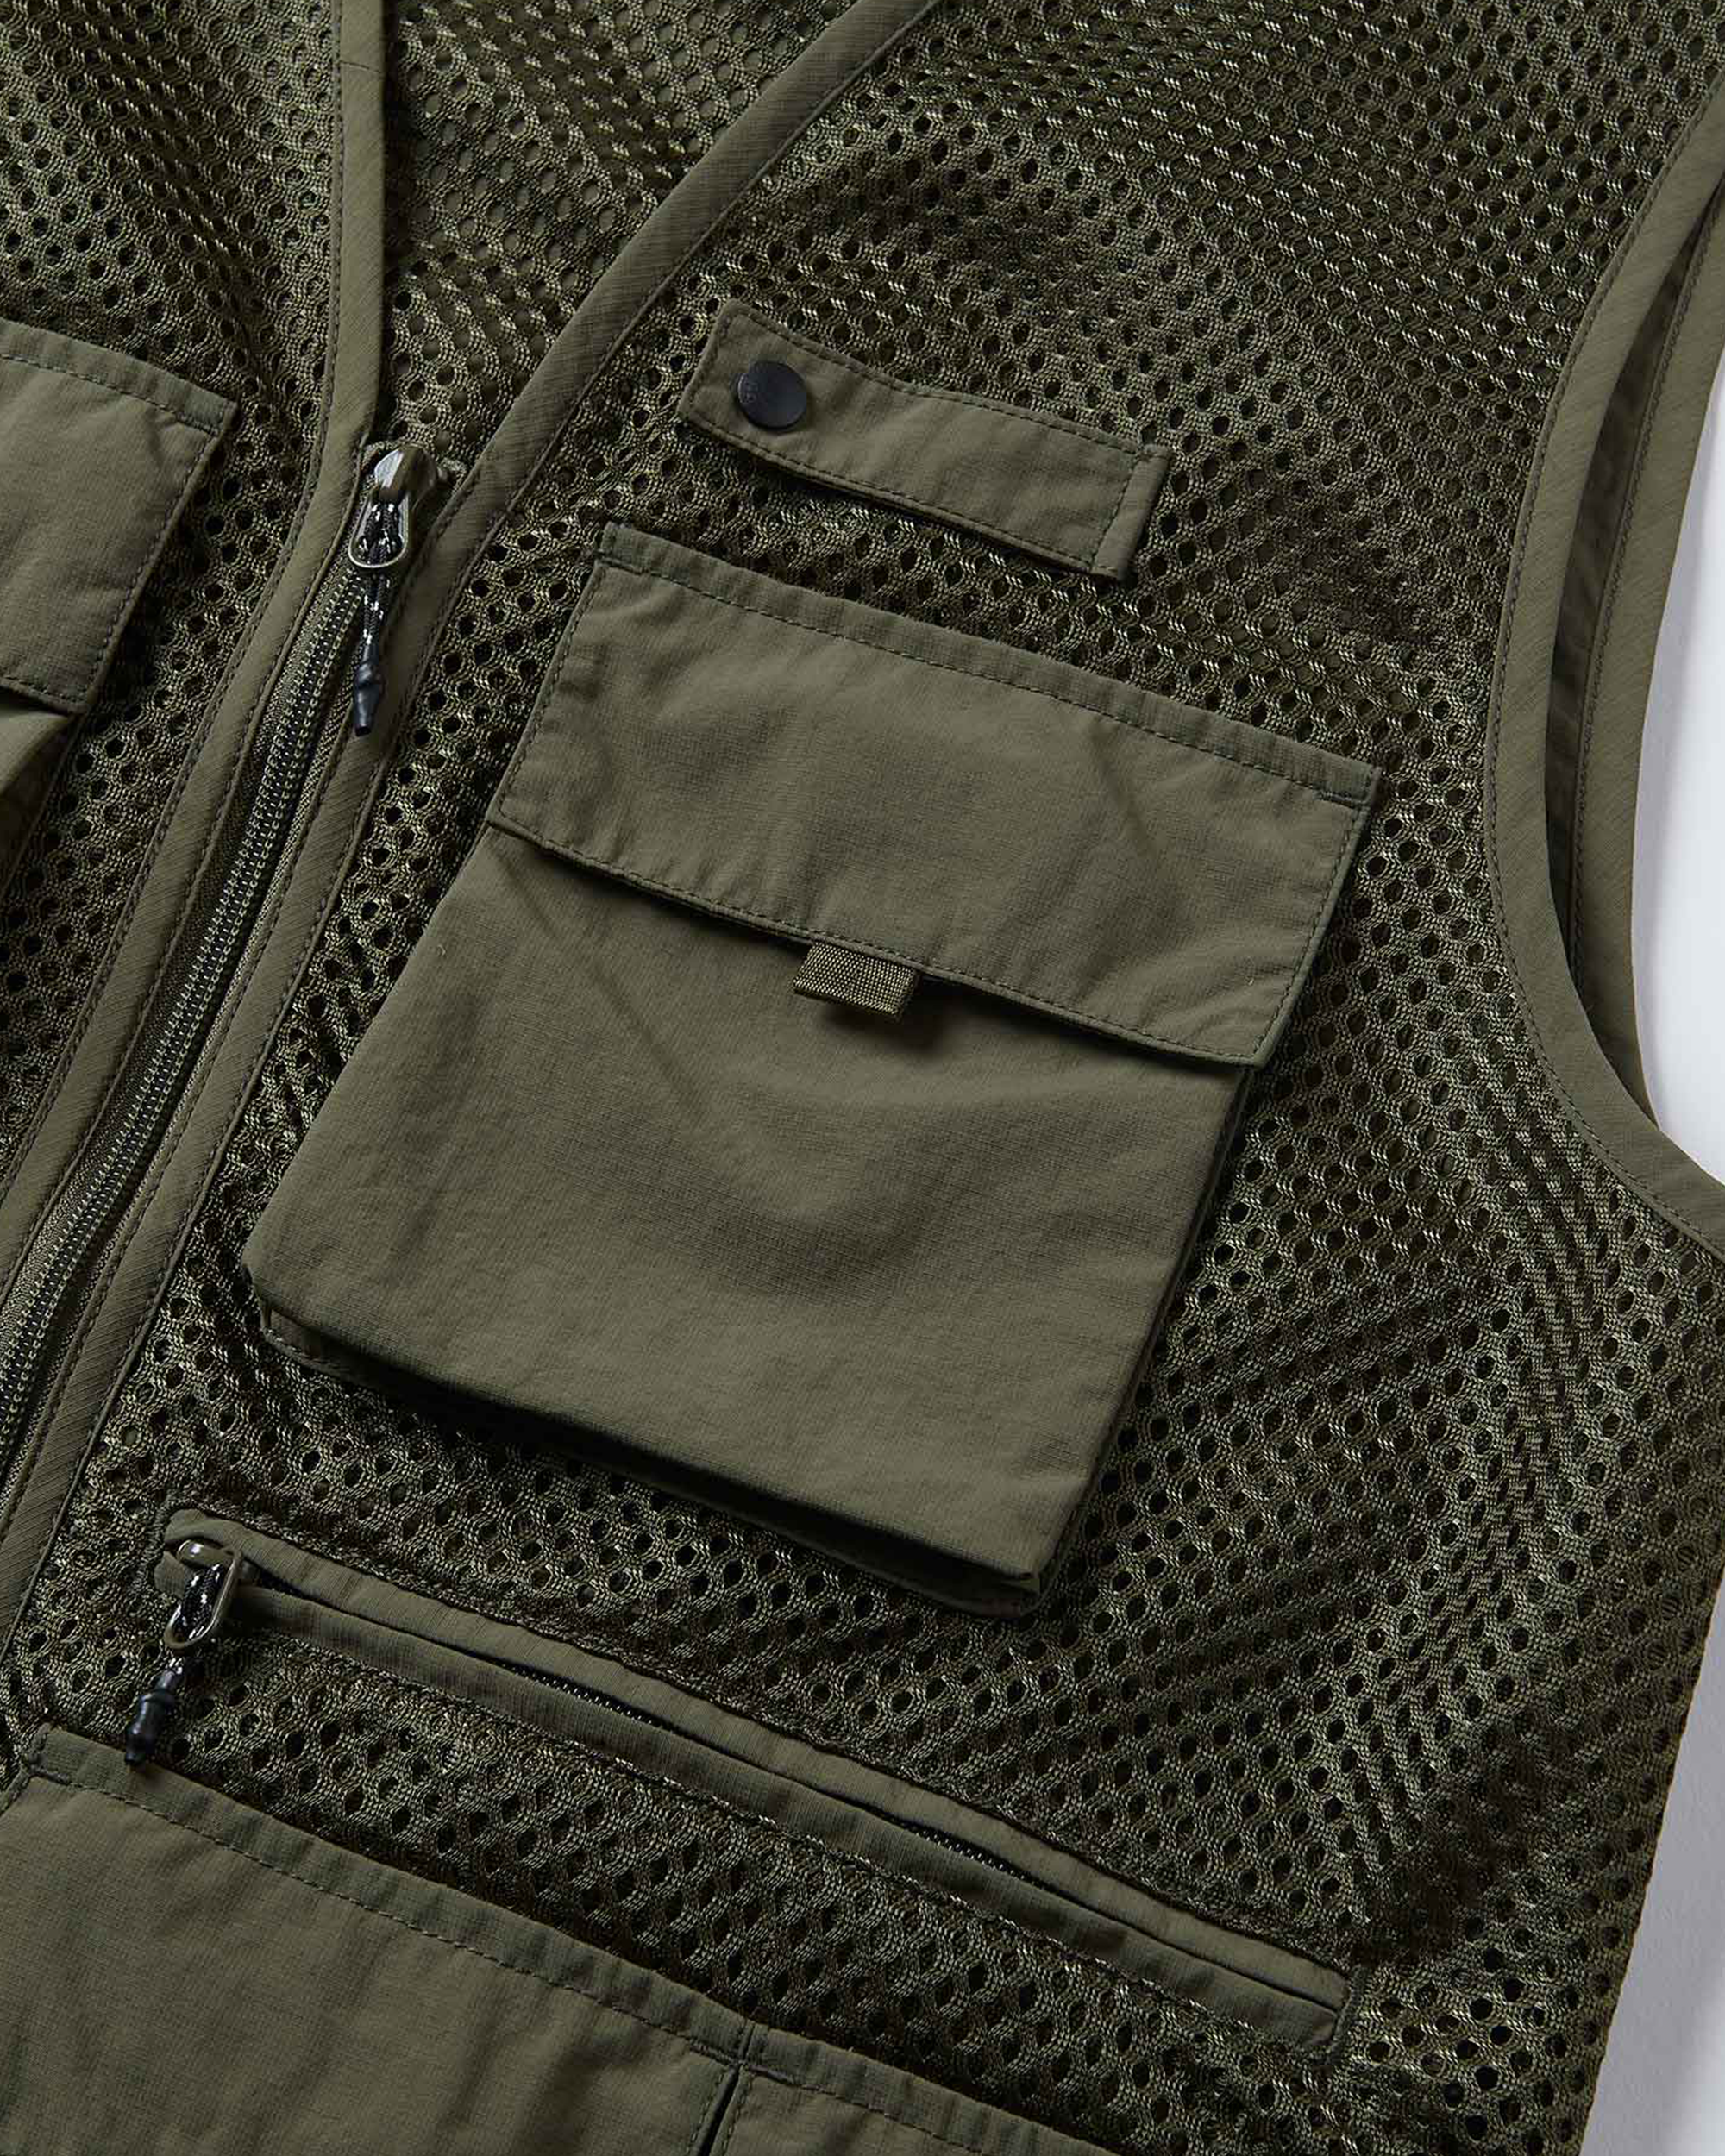 Gone Fishing Vest - Army Green